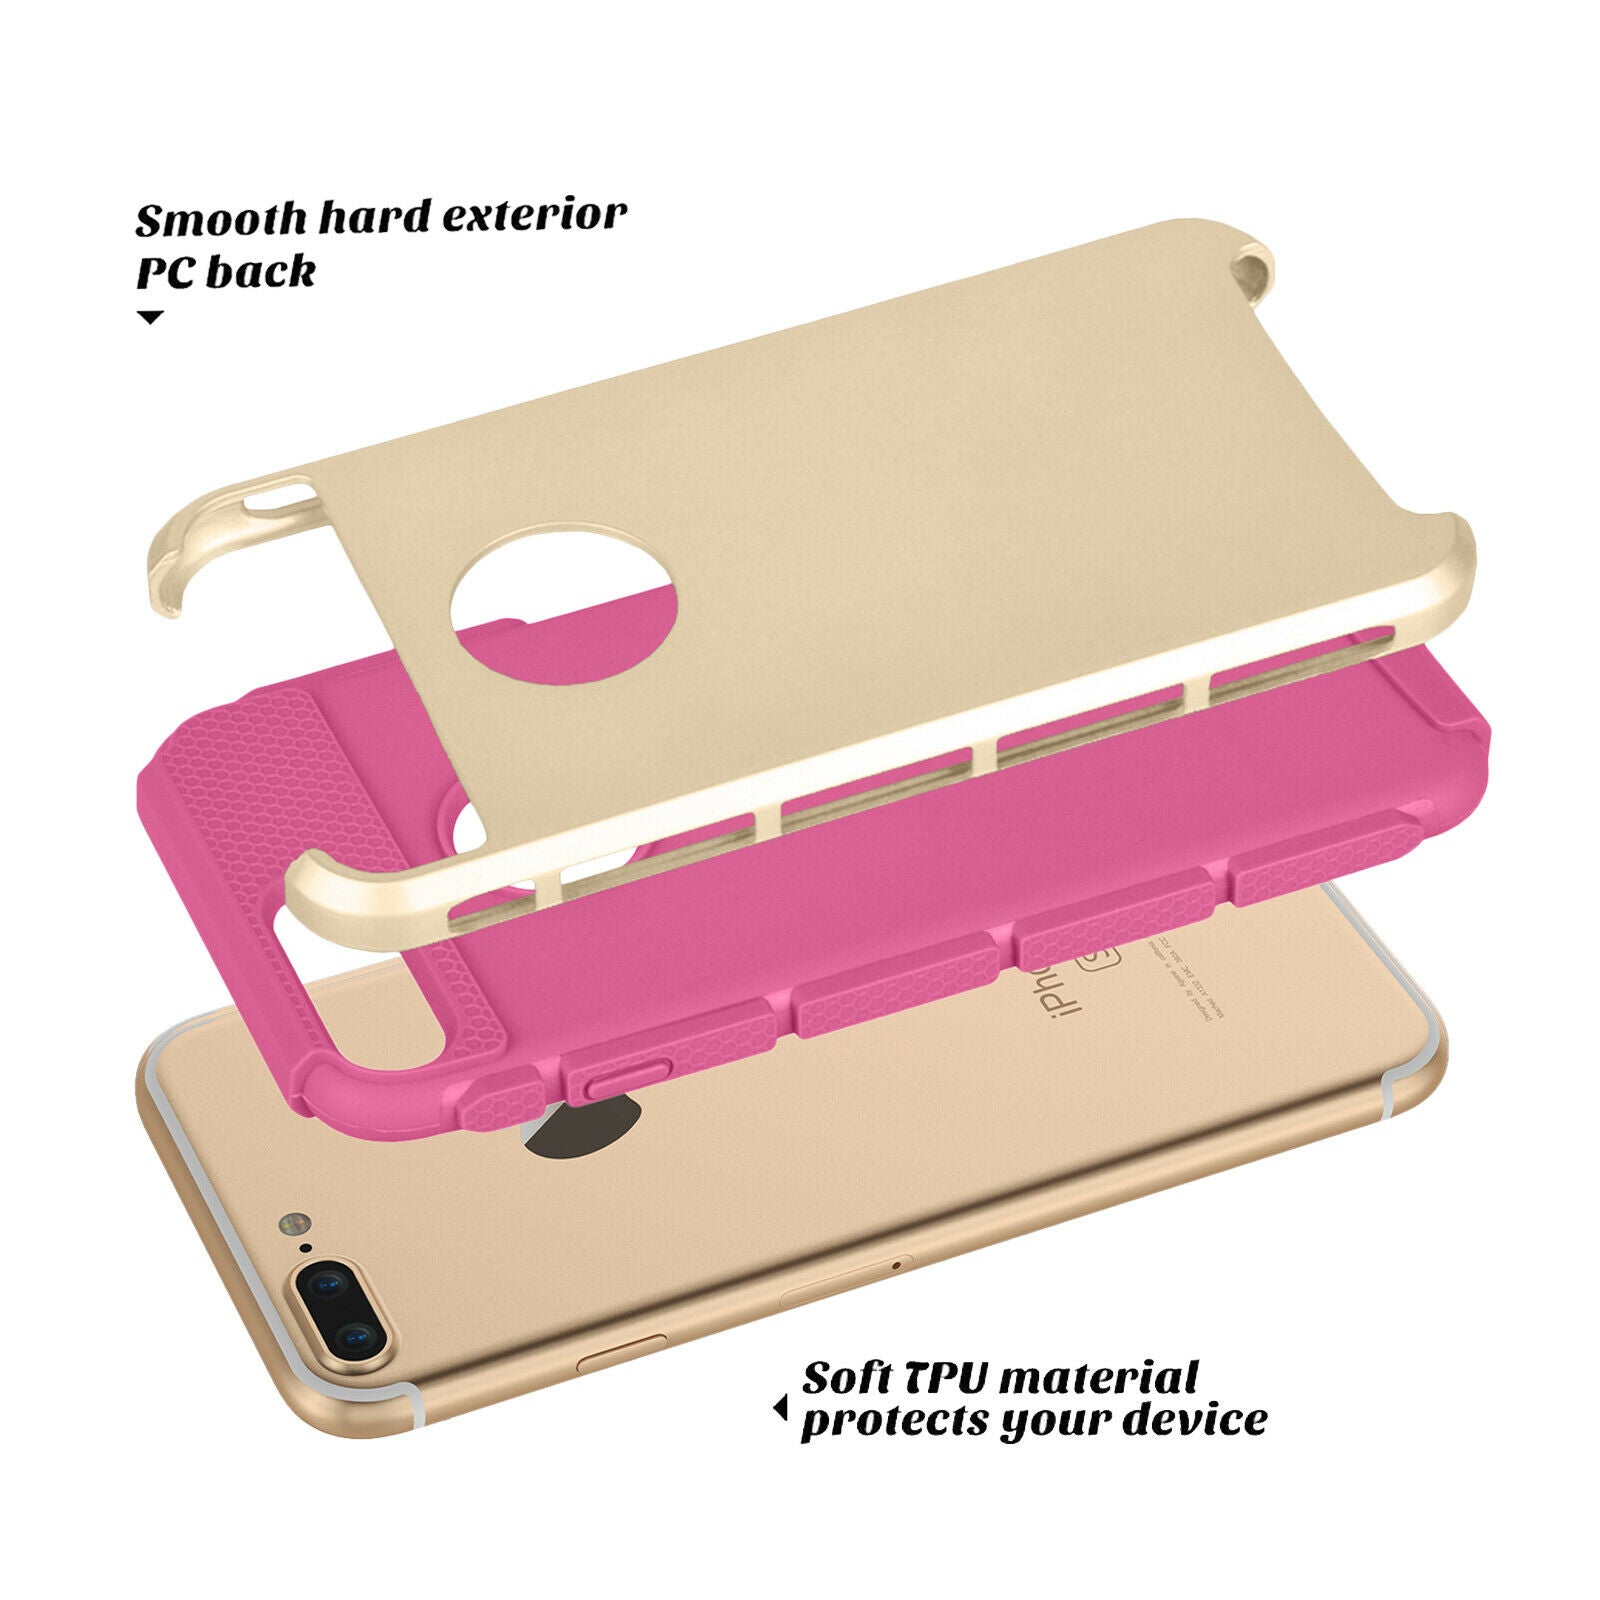 Case Shockproof Rugged Rubber Cover For iPhone - carolay.co